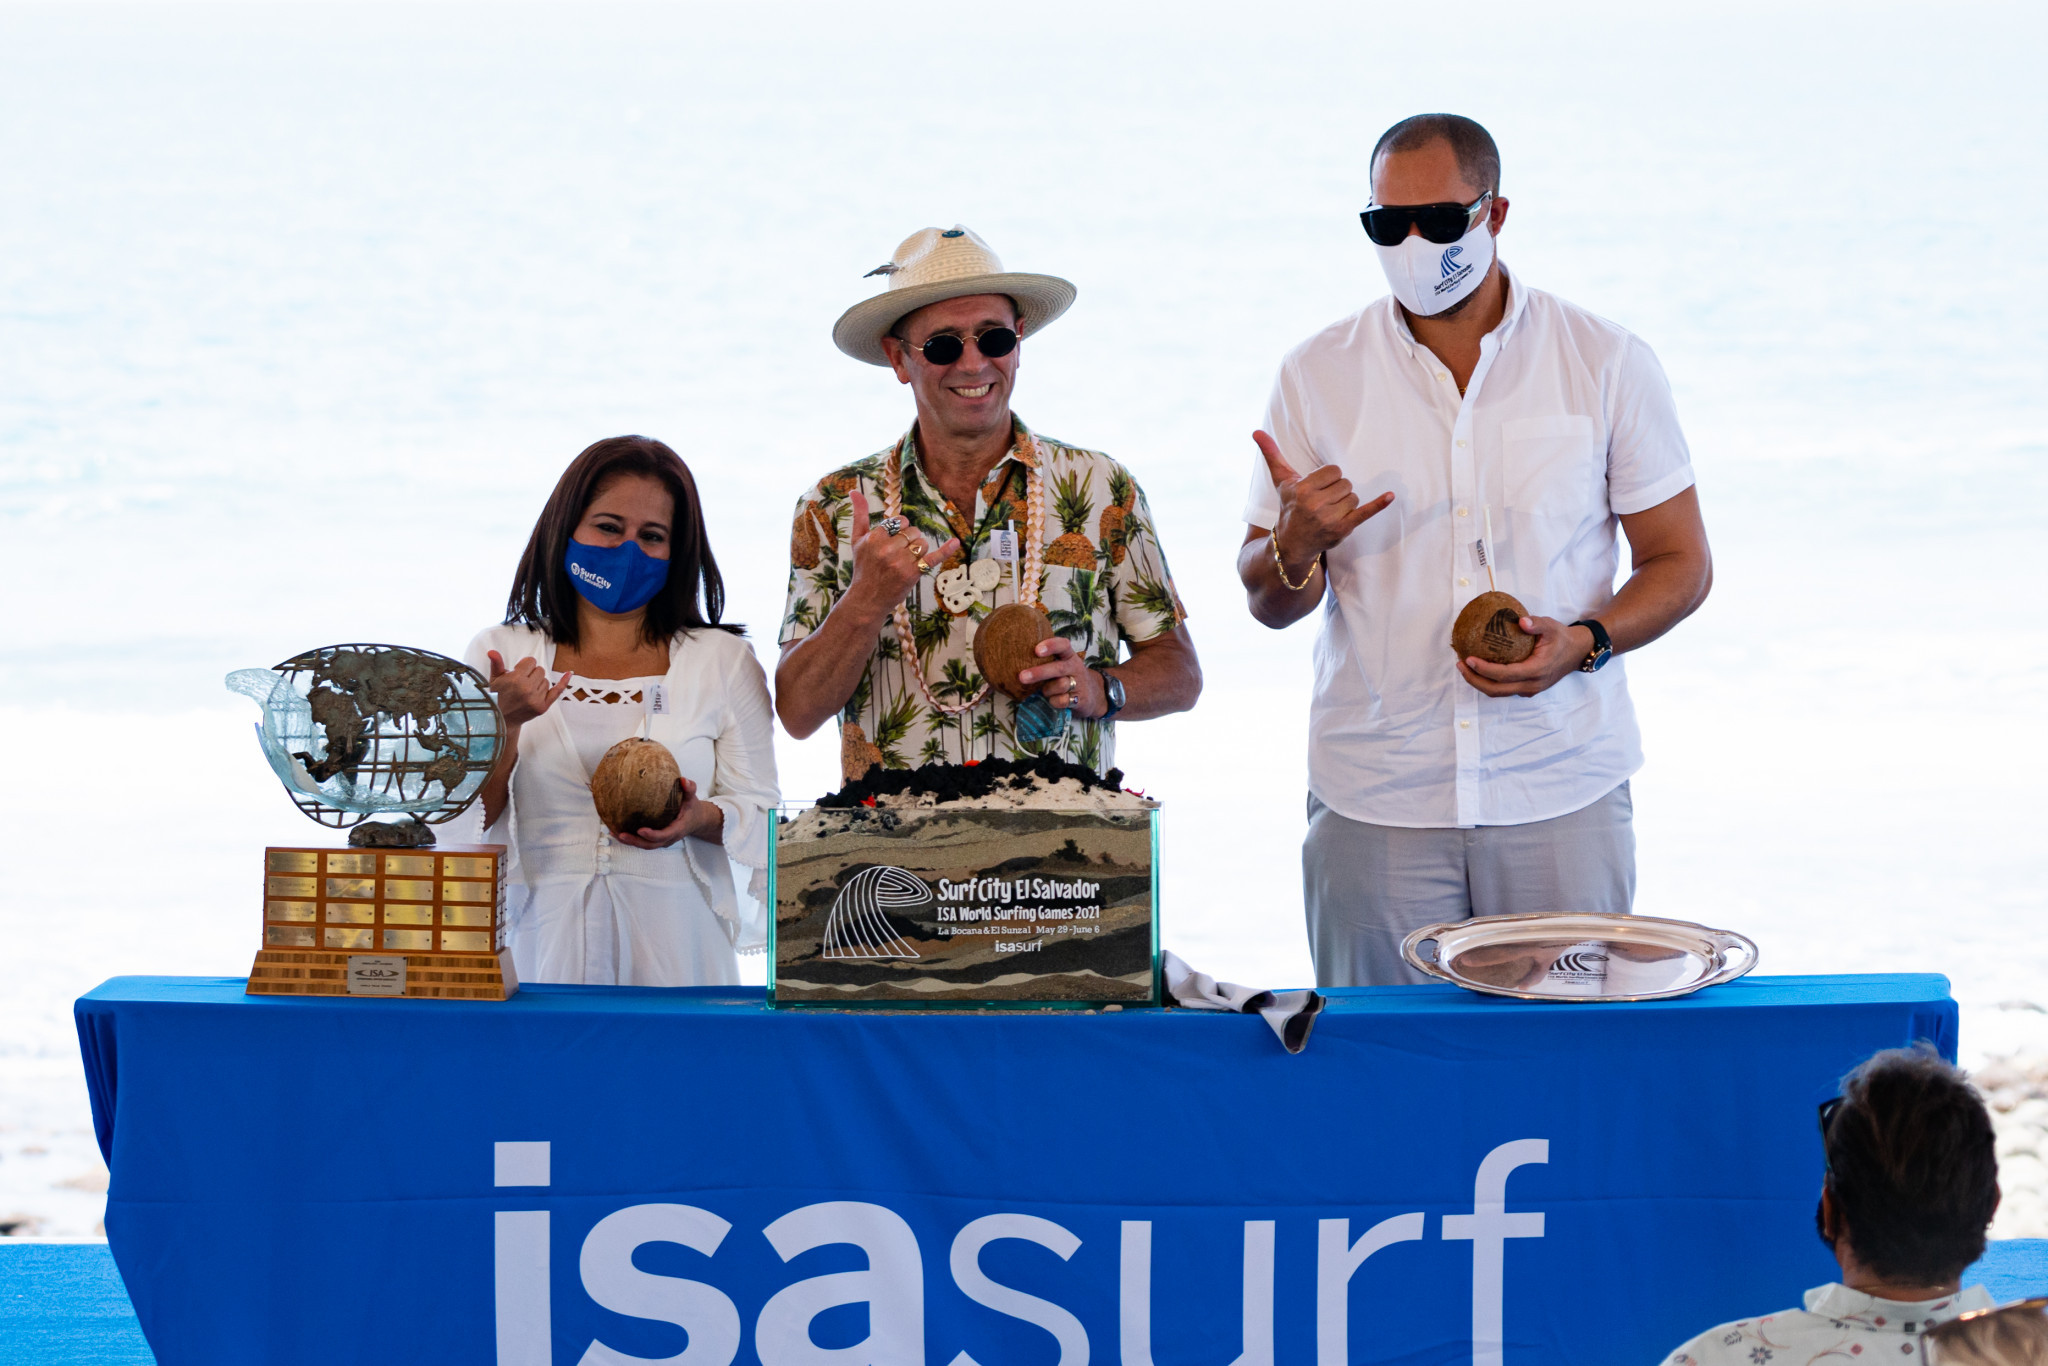 ISA President Fernando Aguerre, centre, made a welcome speech as part of the World Surfing Games Opening Ceremony ©ISA/Ben Reed